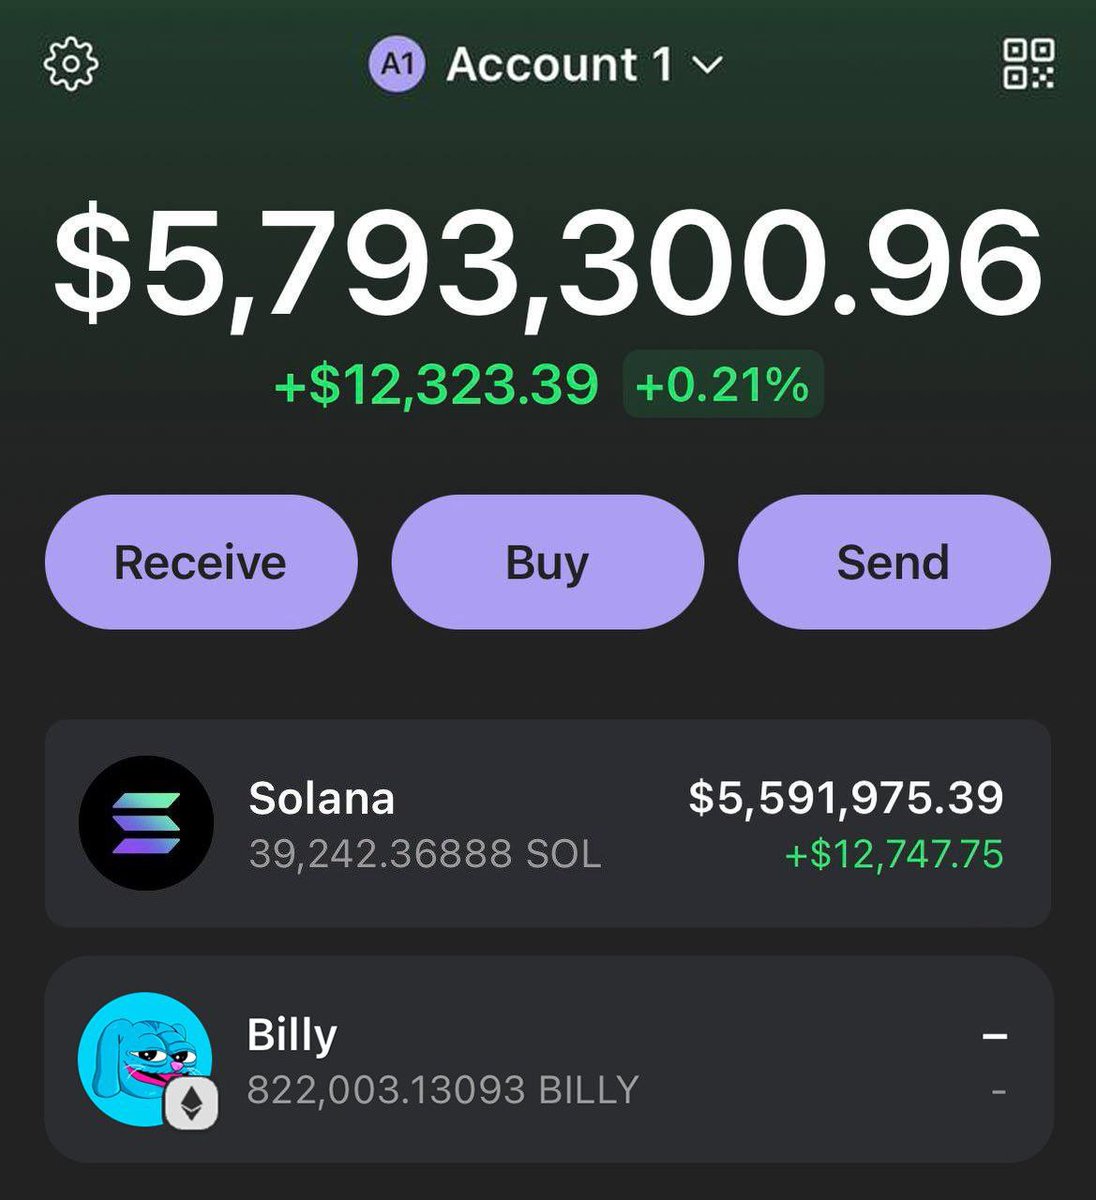 I made over $5,000,000 trading memecoins this month. 💰

To celebrate I’m GIVING AWAY $2,000 SOL to try help some people out 🩵

To enter: Like, RT and comment address

Many keep asking me for my next play, I put 5 ETH into @BillyBaseCoin, they just launched their presale on the…